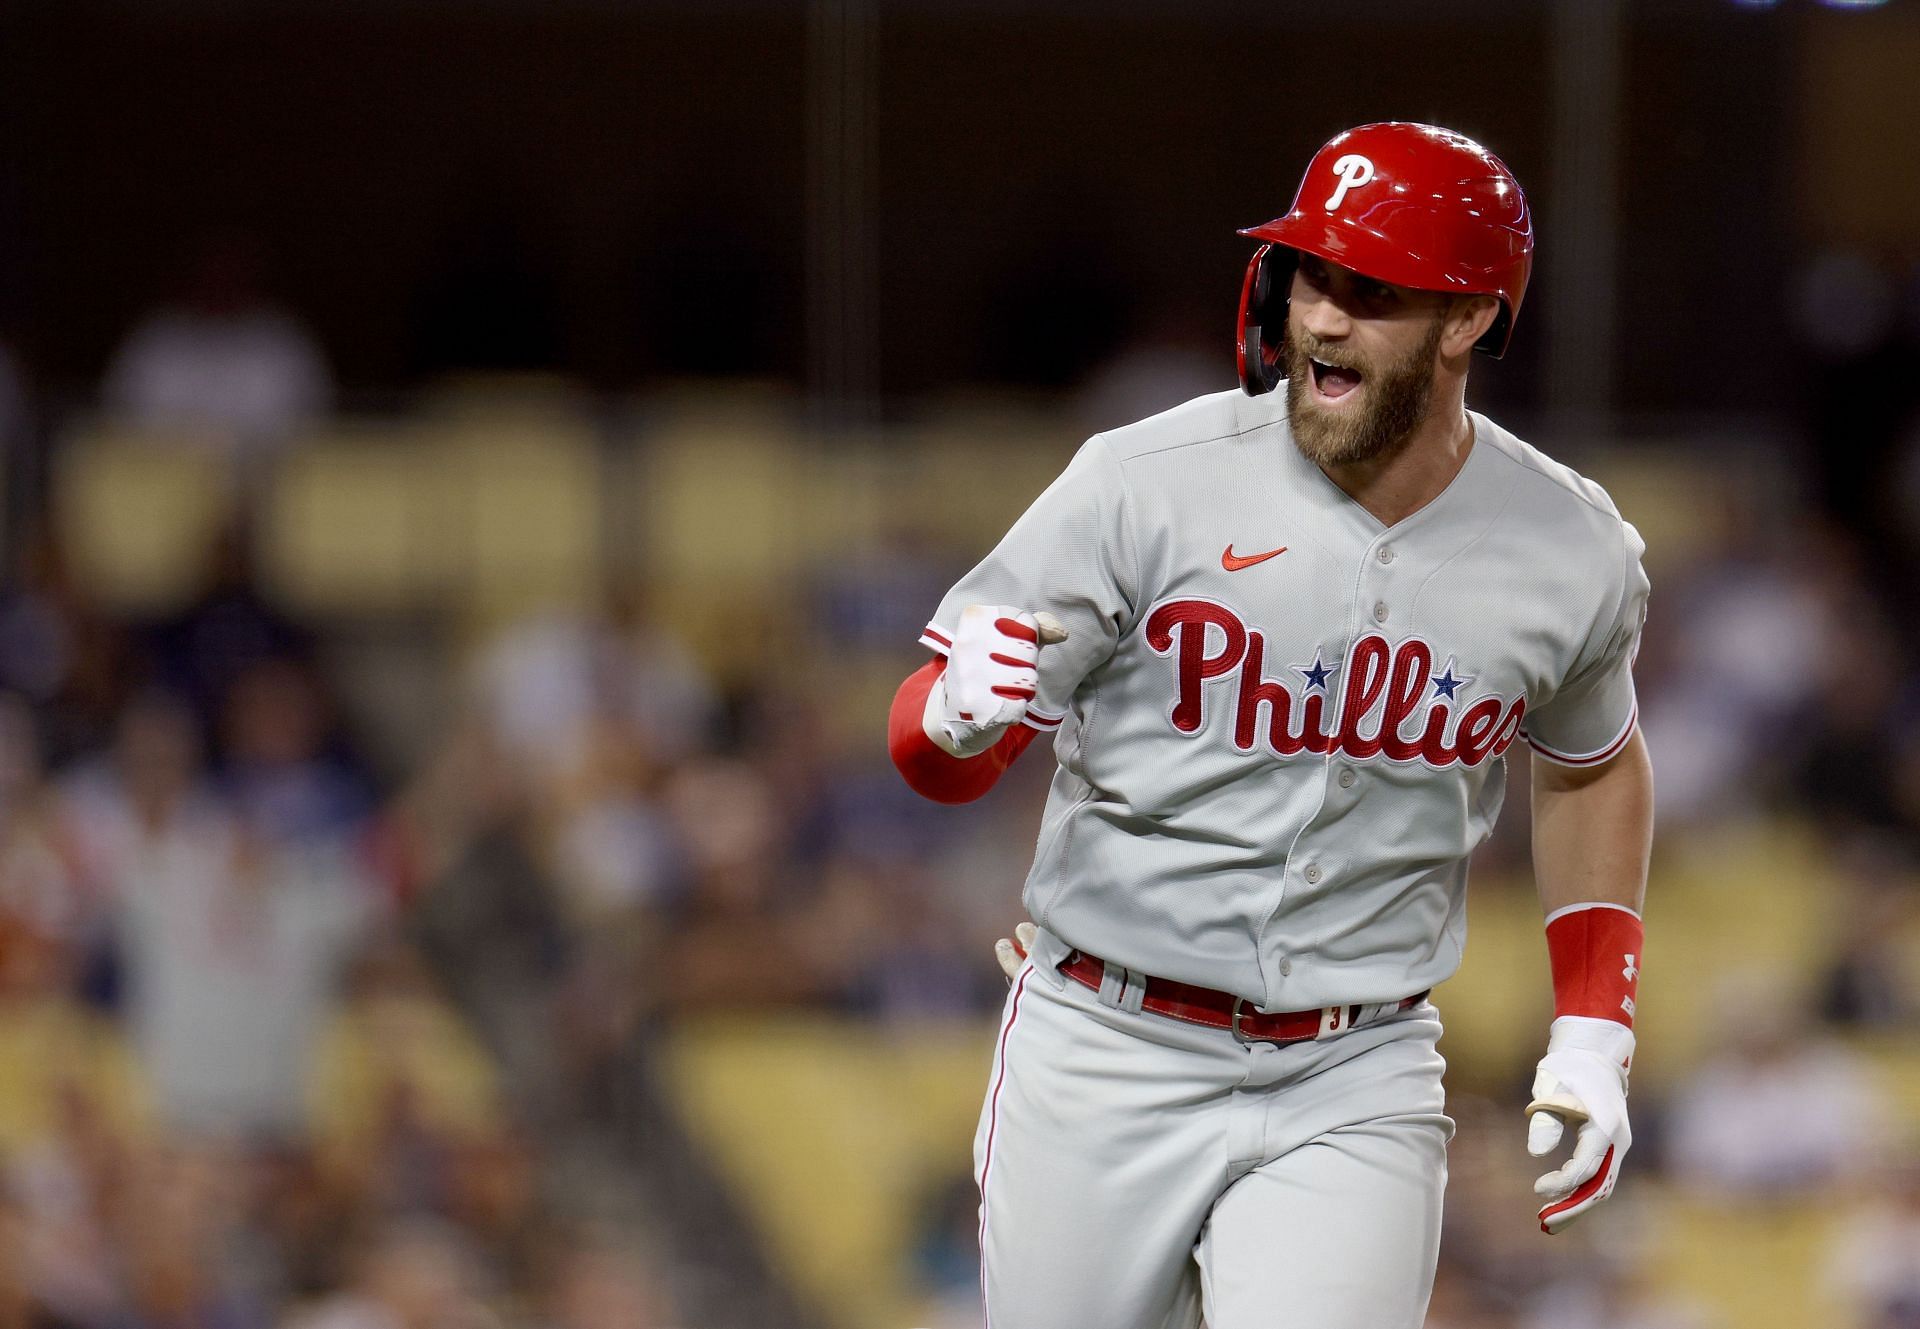 MLB, Rob Manfred Have No Time For Bryce Harper's Elbow Brace